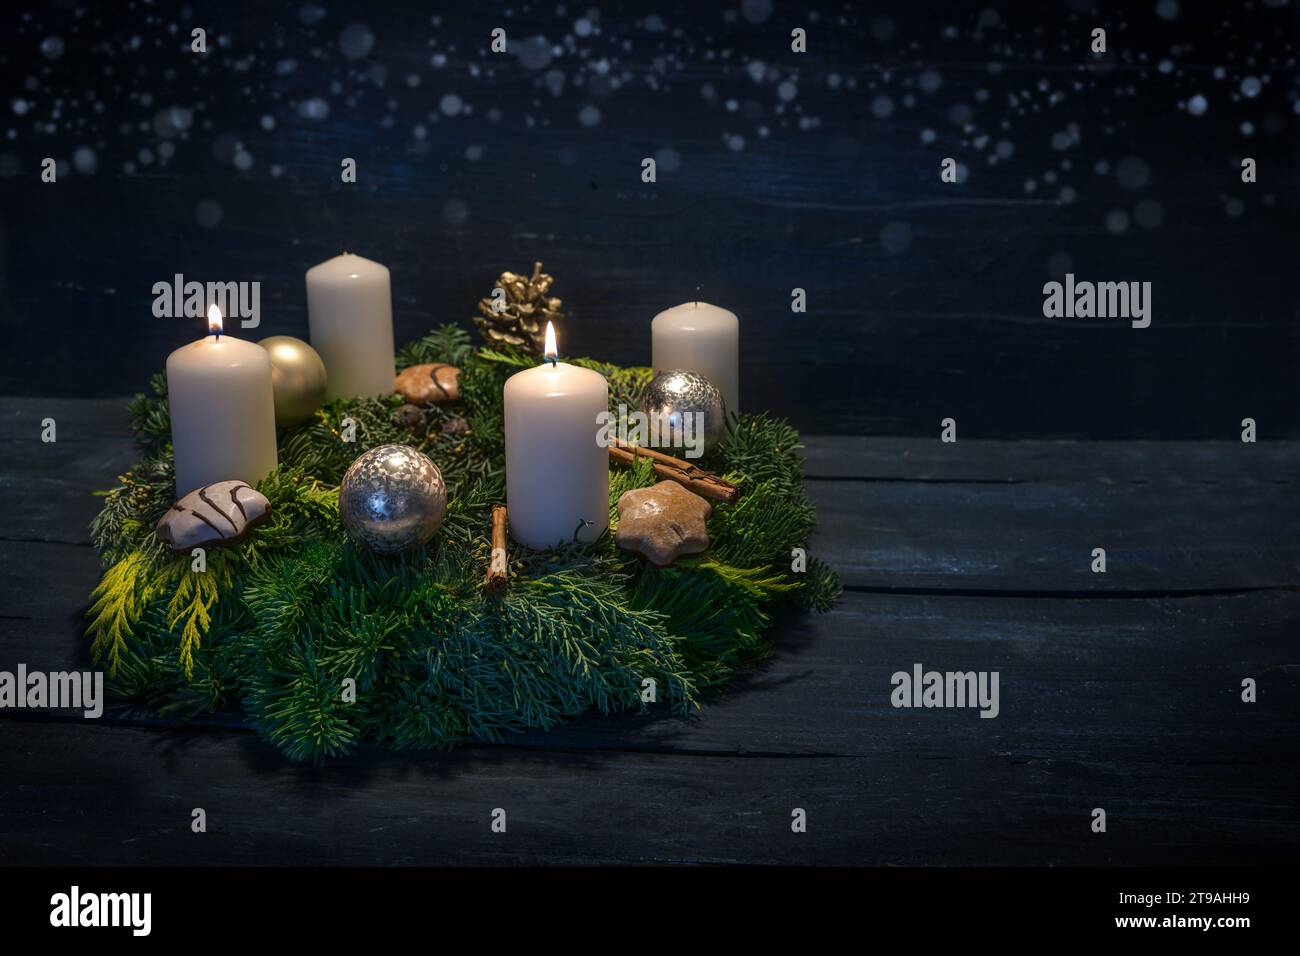 Green advent wreath with white candles, two are lit for second advent, Christmas decoration and cookies, dark blue wooden background with star bokeh, Stock Photo